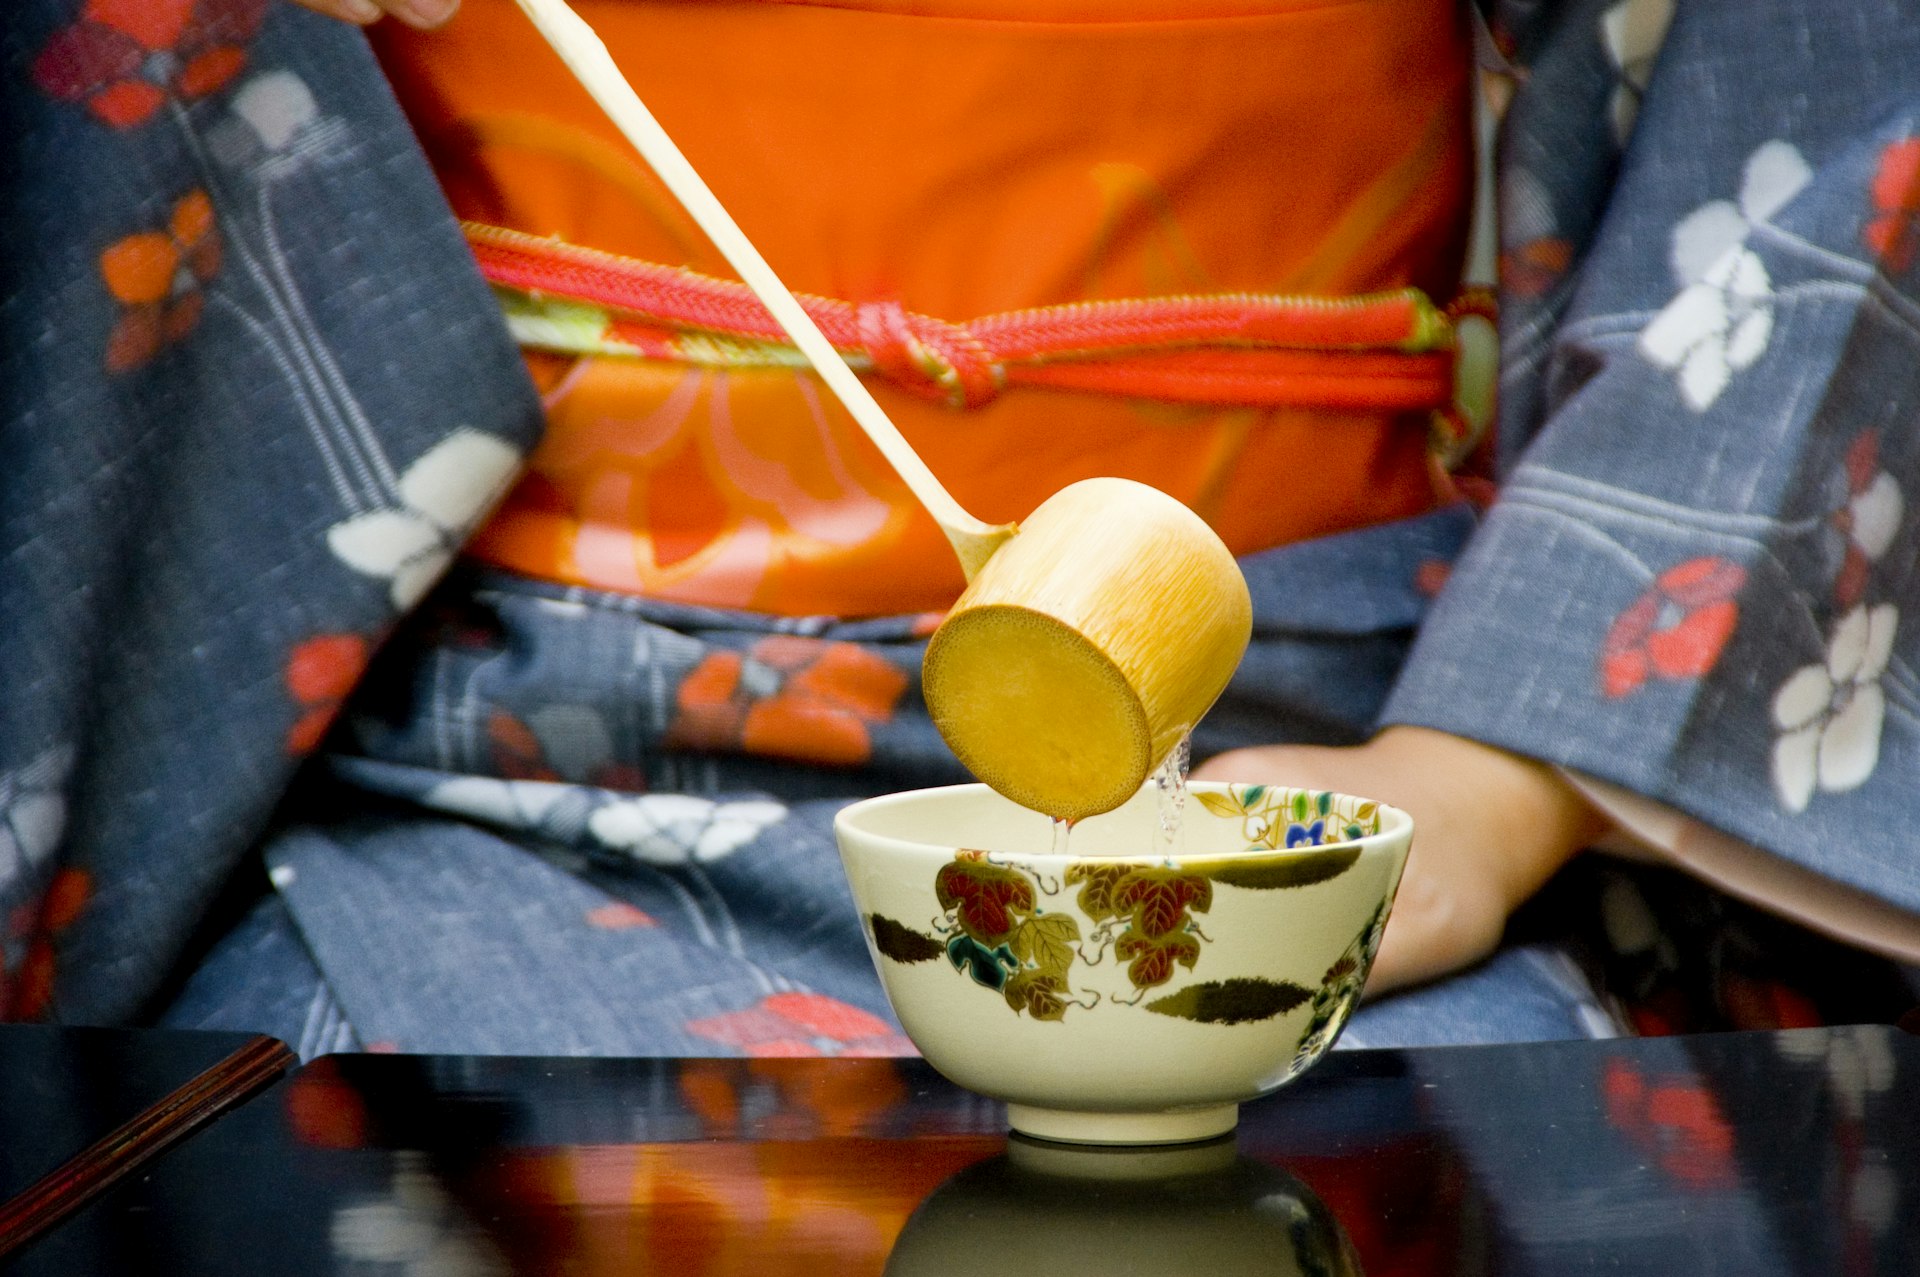 A horizontal image of a person conducting a tea ceremony, wearing a blue kimono and orange obi pouring hot water  from a wooden ladle into a Japanese tea cut sitting on a black lacquer table is shown